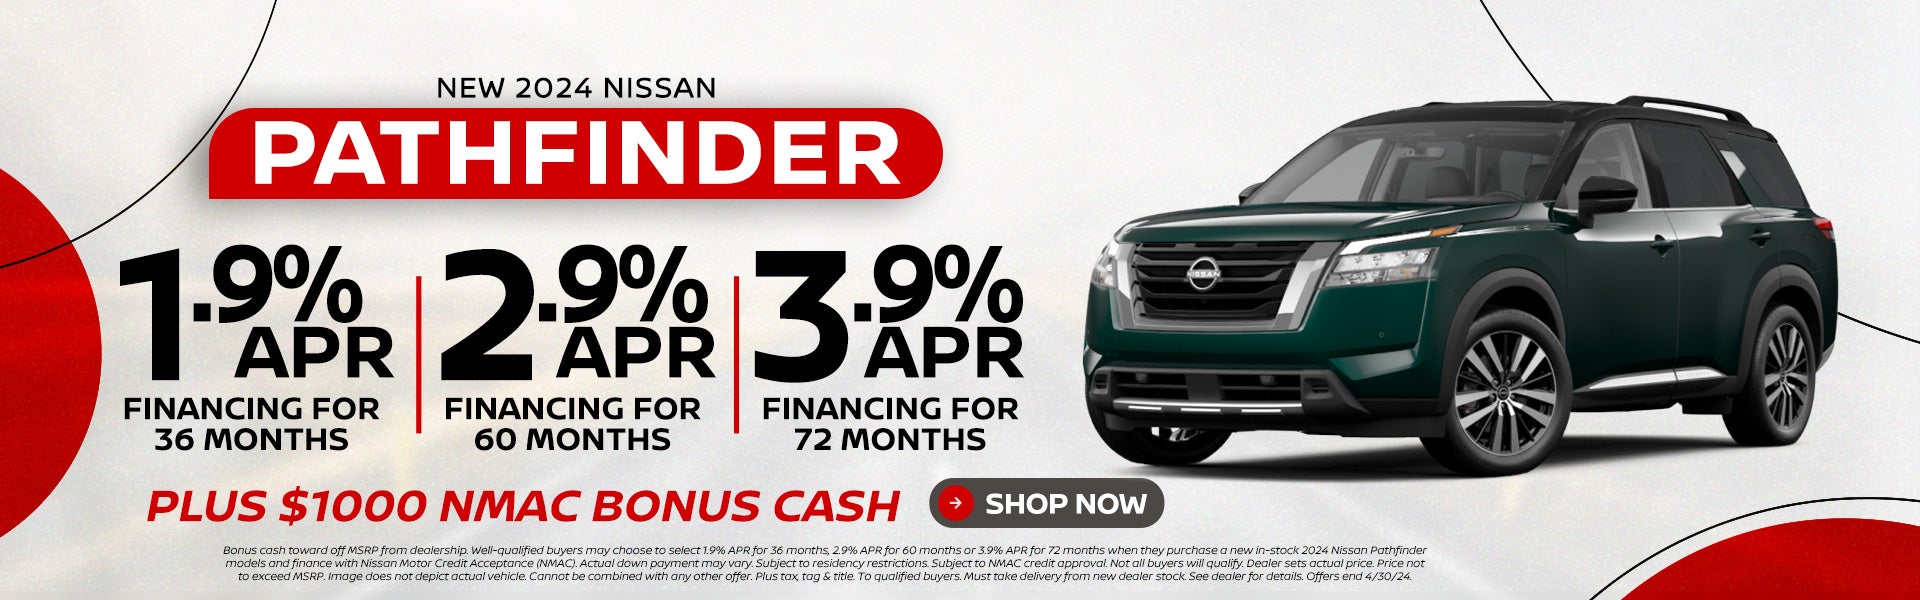 2024 Pathfinder 1.9% APR for 36 months | 2.9% APR for 60 mon